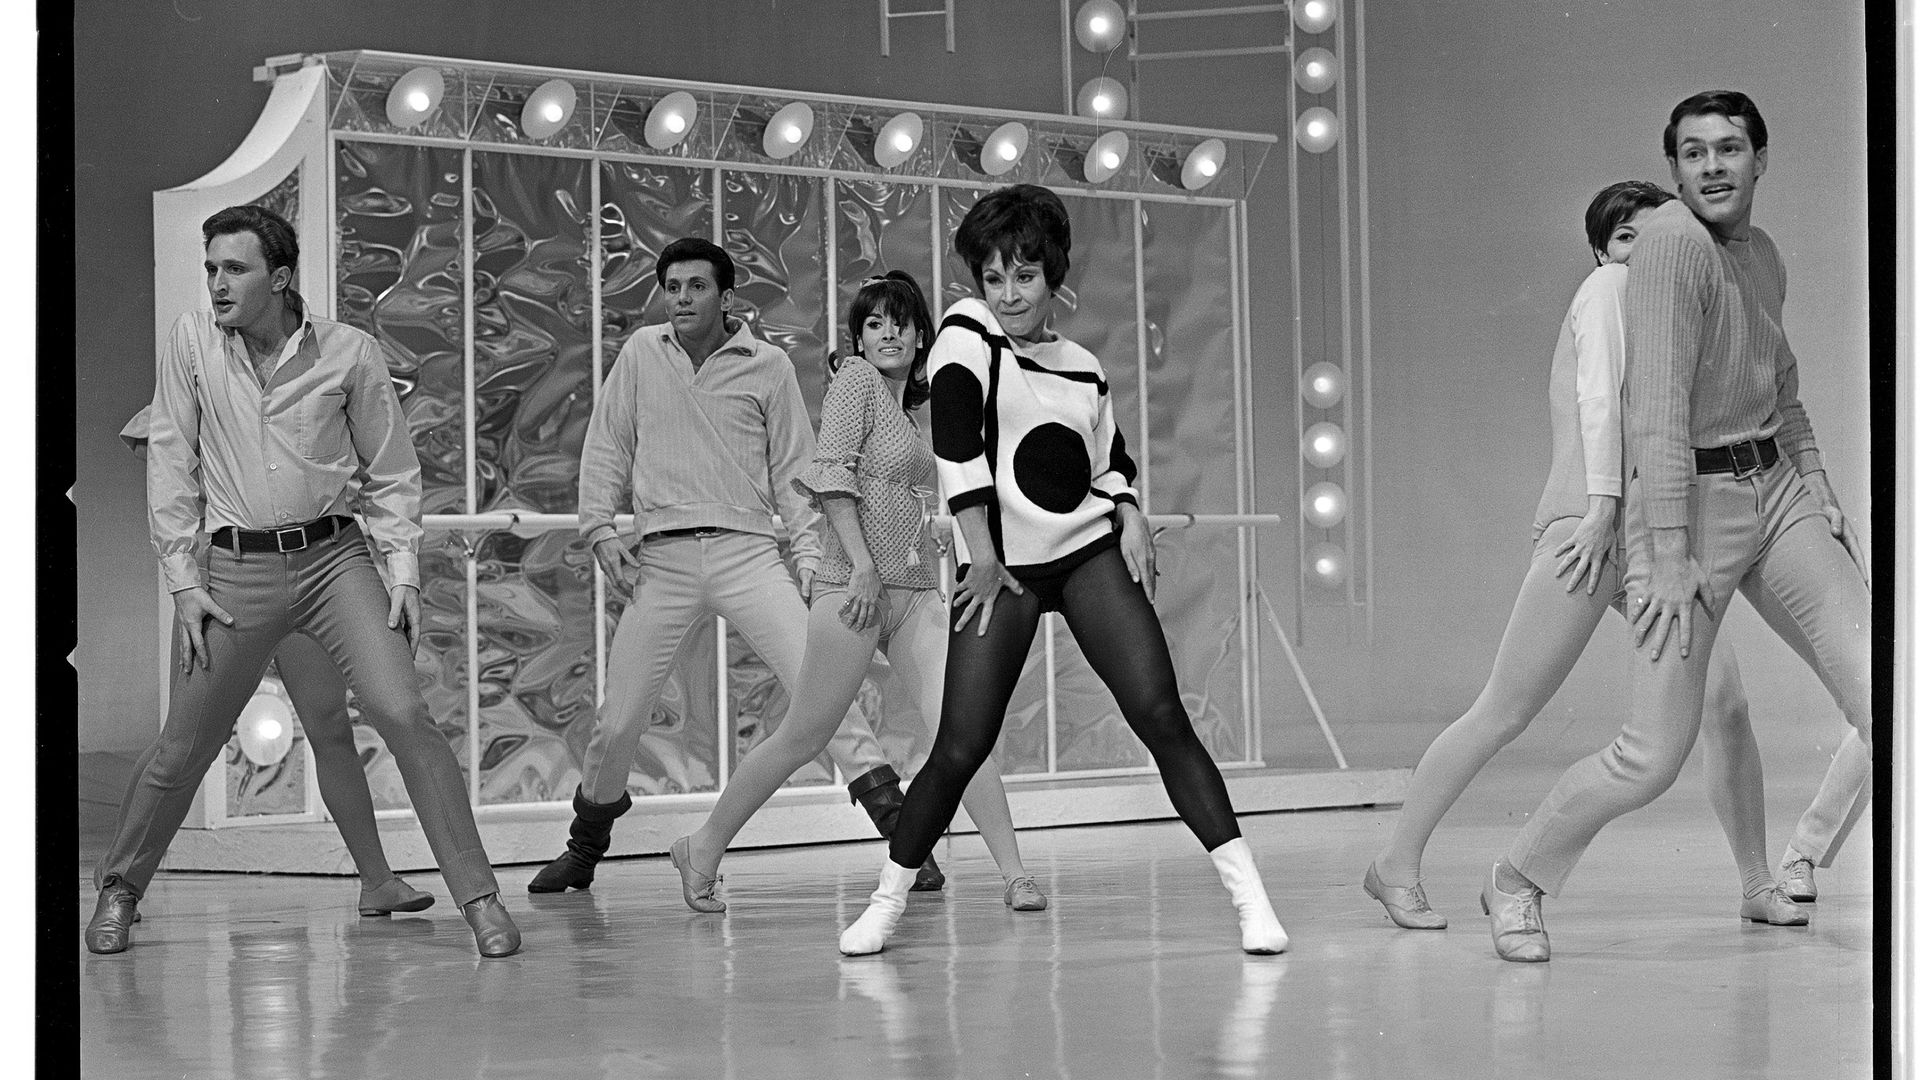 Several men dancers surround Chita Rivera as she dances on a stage with lights behind her